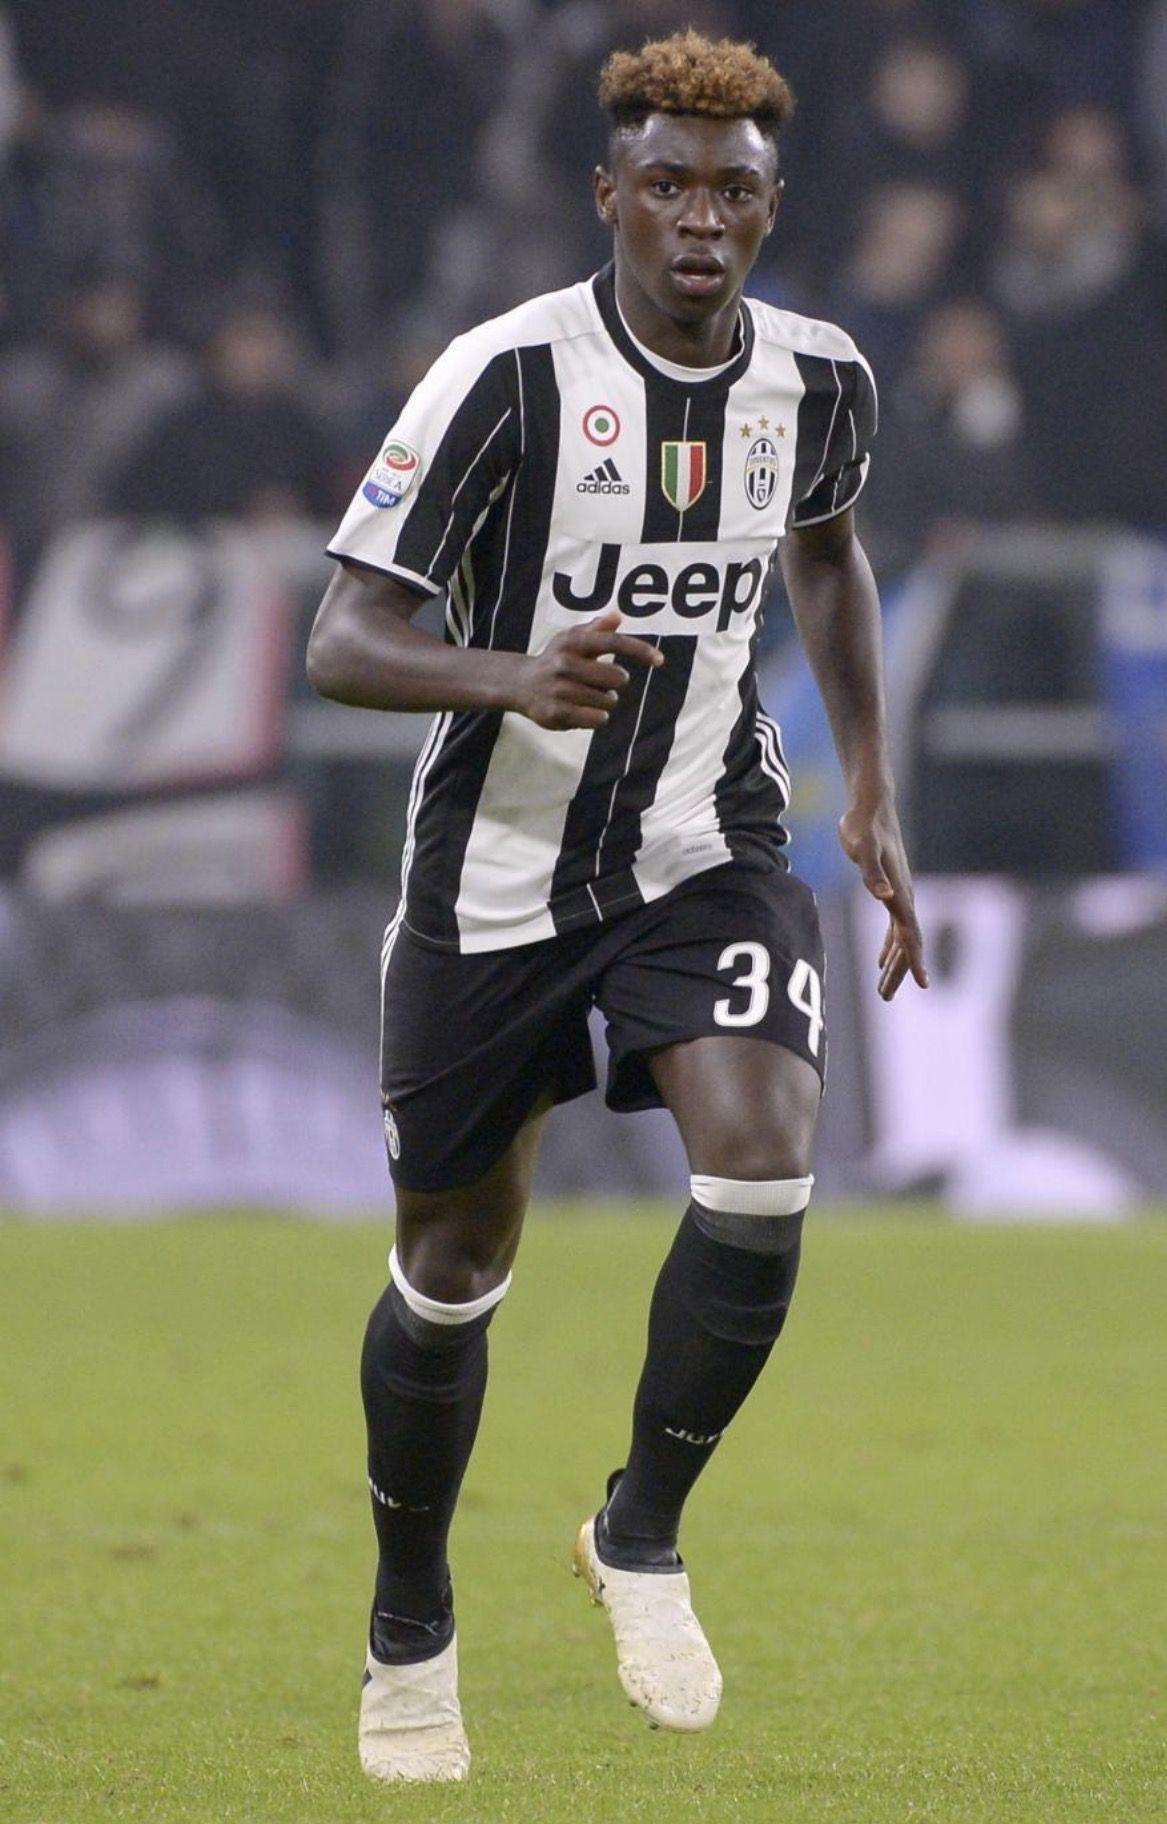 Moise Kean. Juve prim'amore. Football, Sports and Old